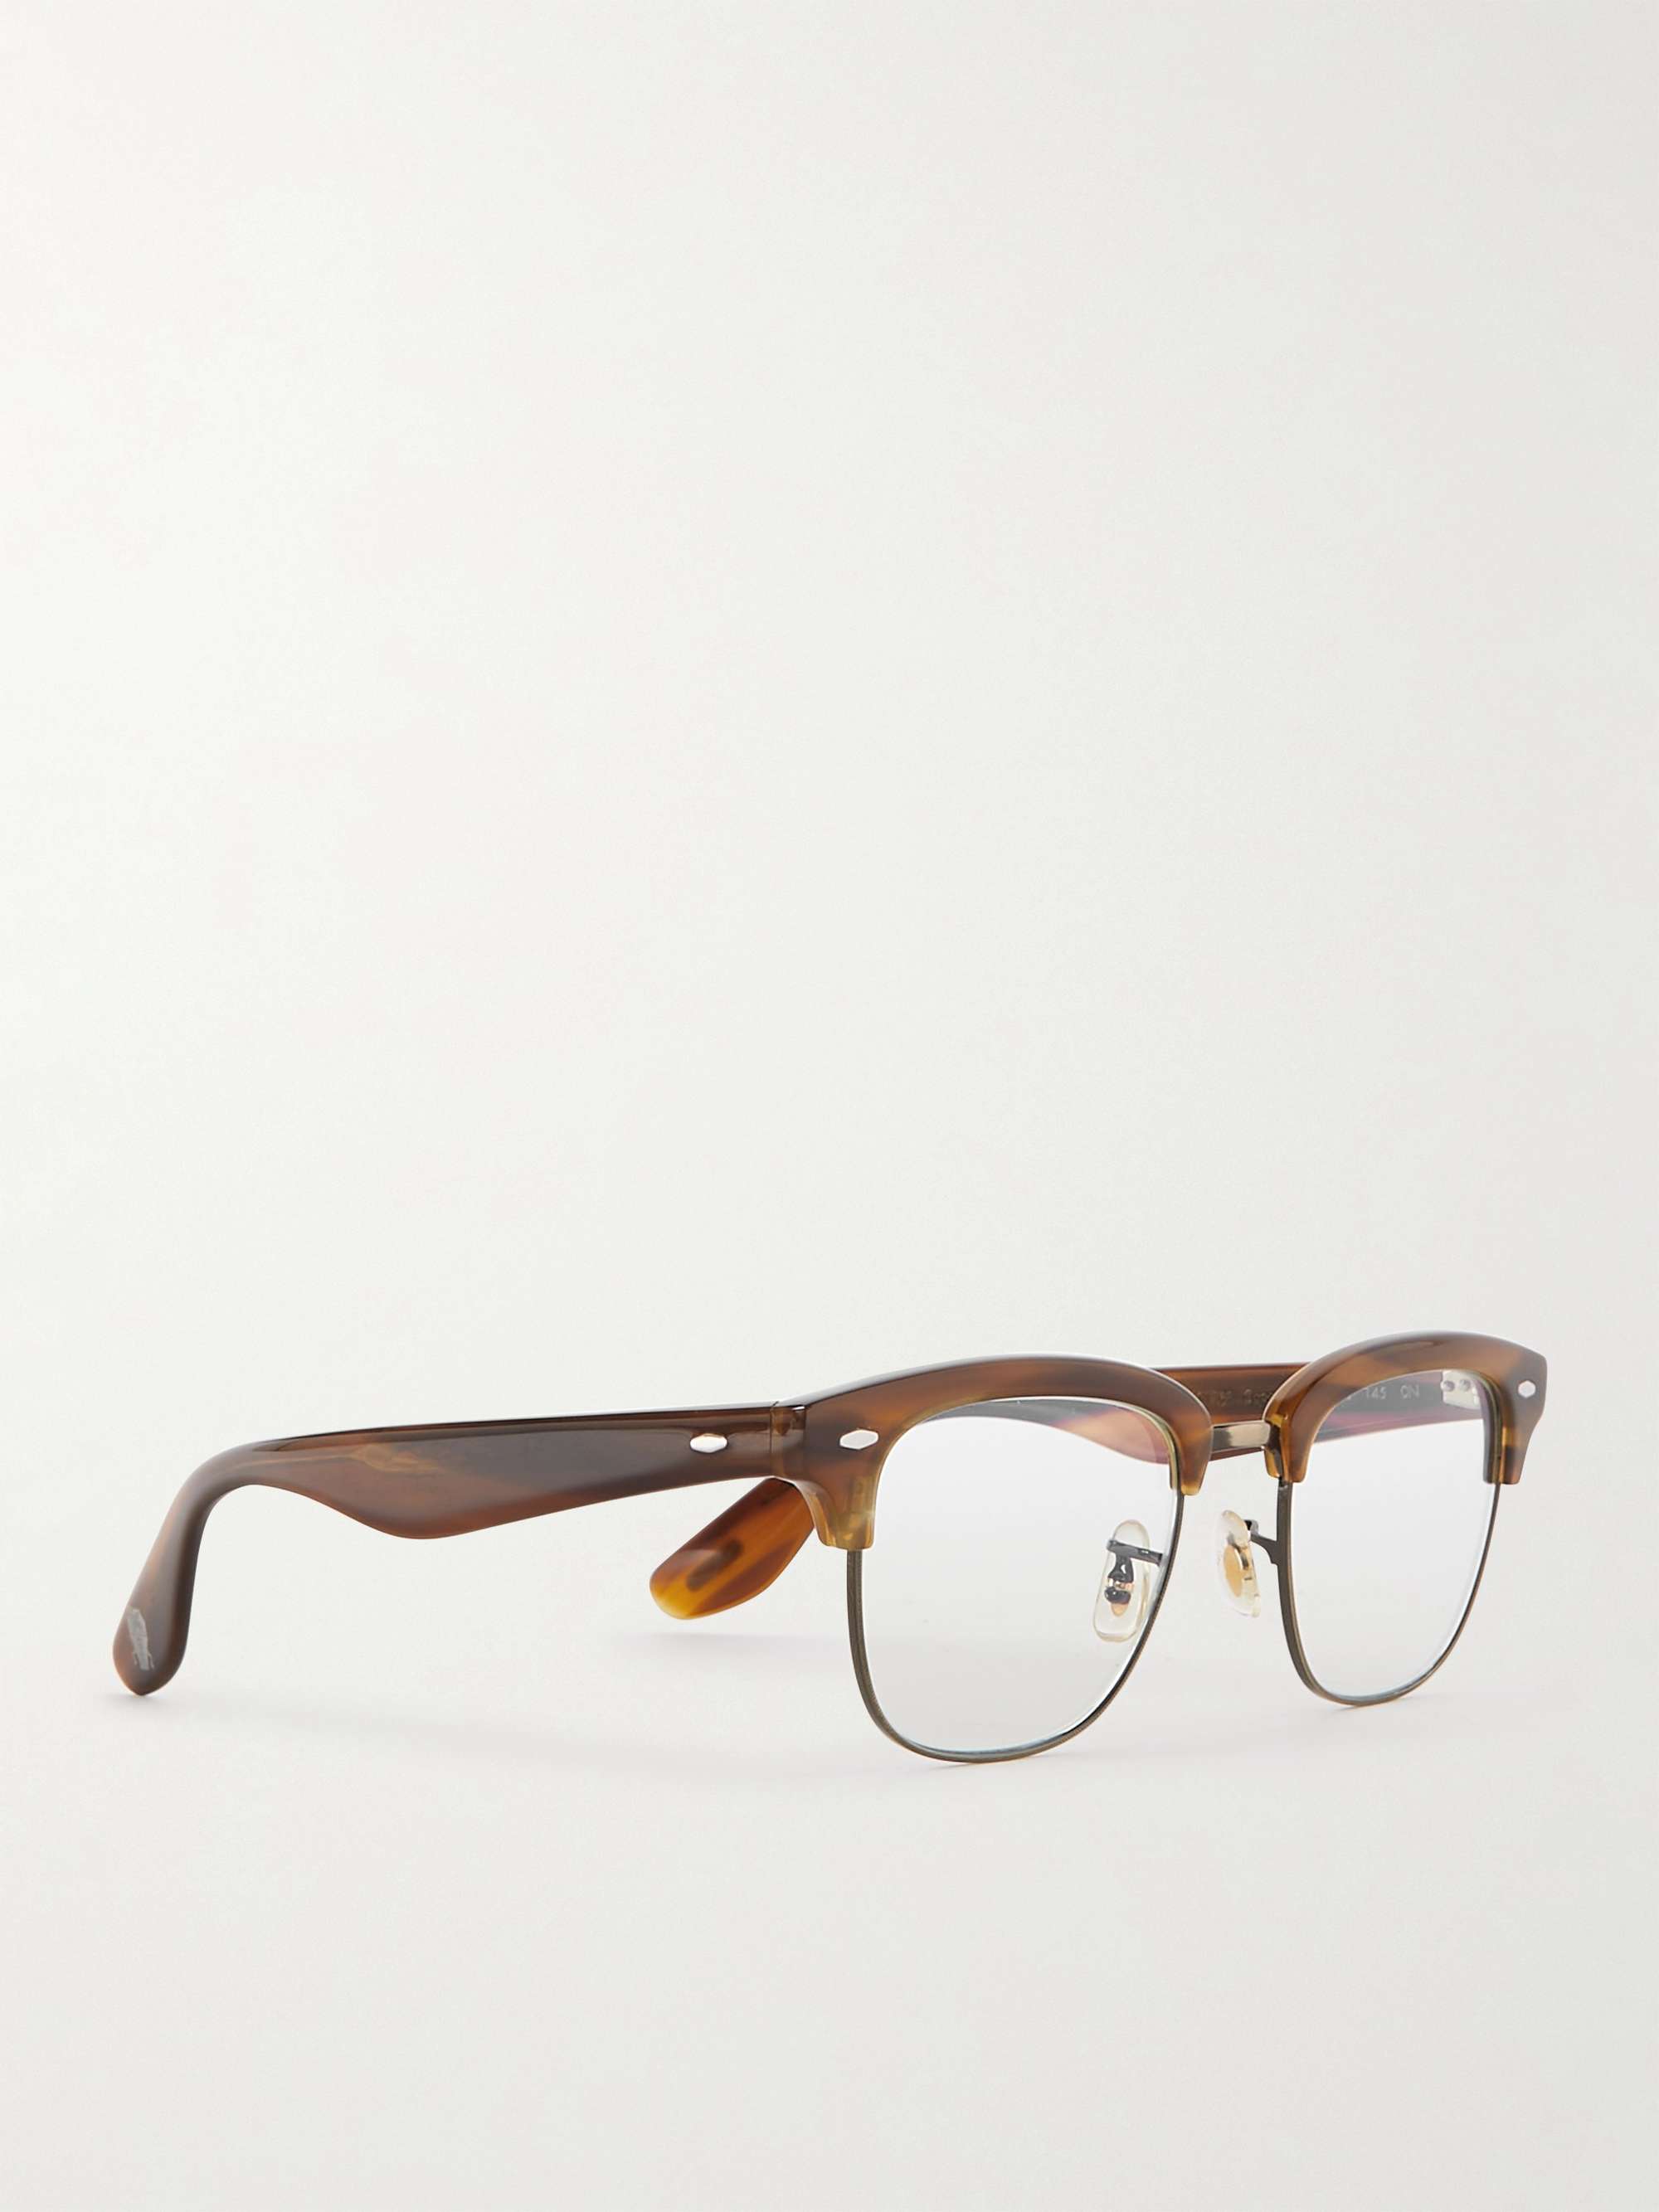 BRUNELLO CUCINELLI + Oliver Peoples Capannelle D-Frame Tortoiseshell Acetate and Silver-Tone Sunglasses